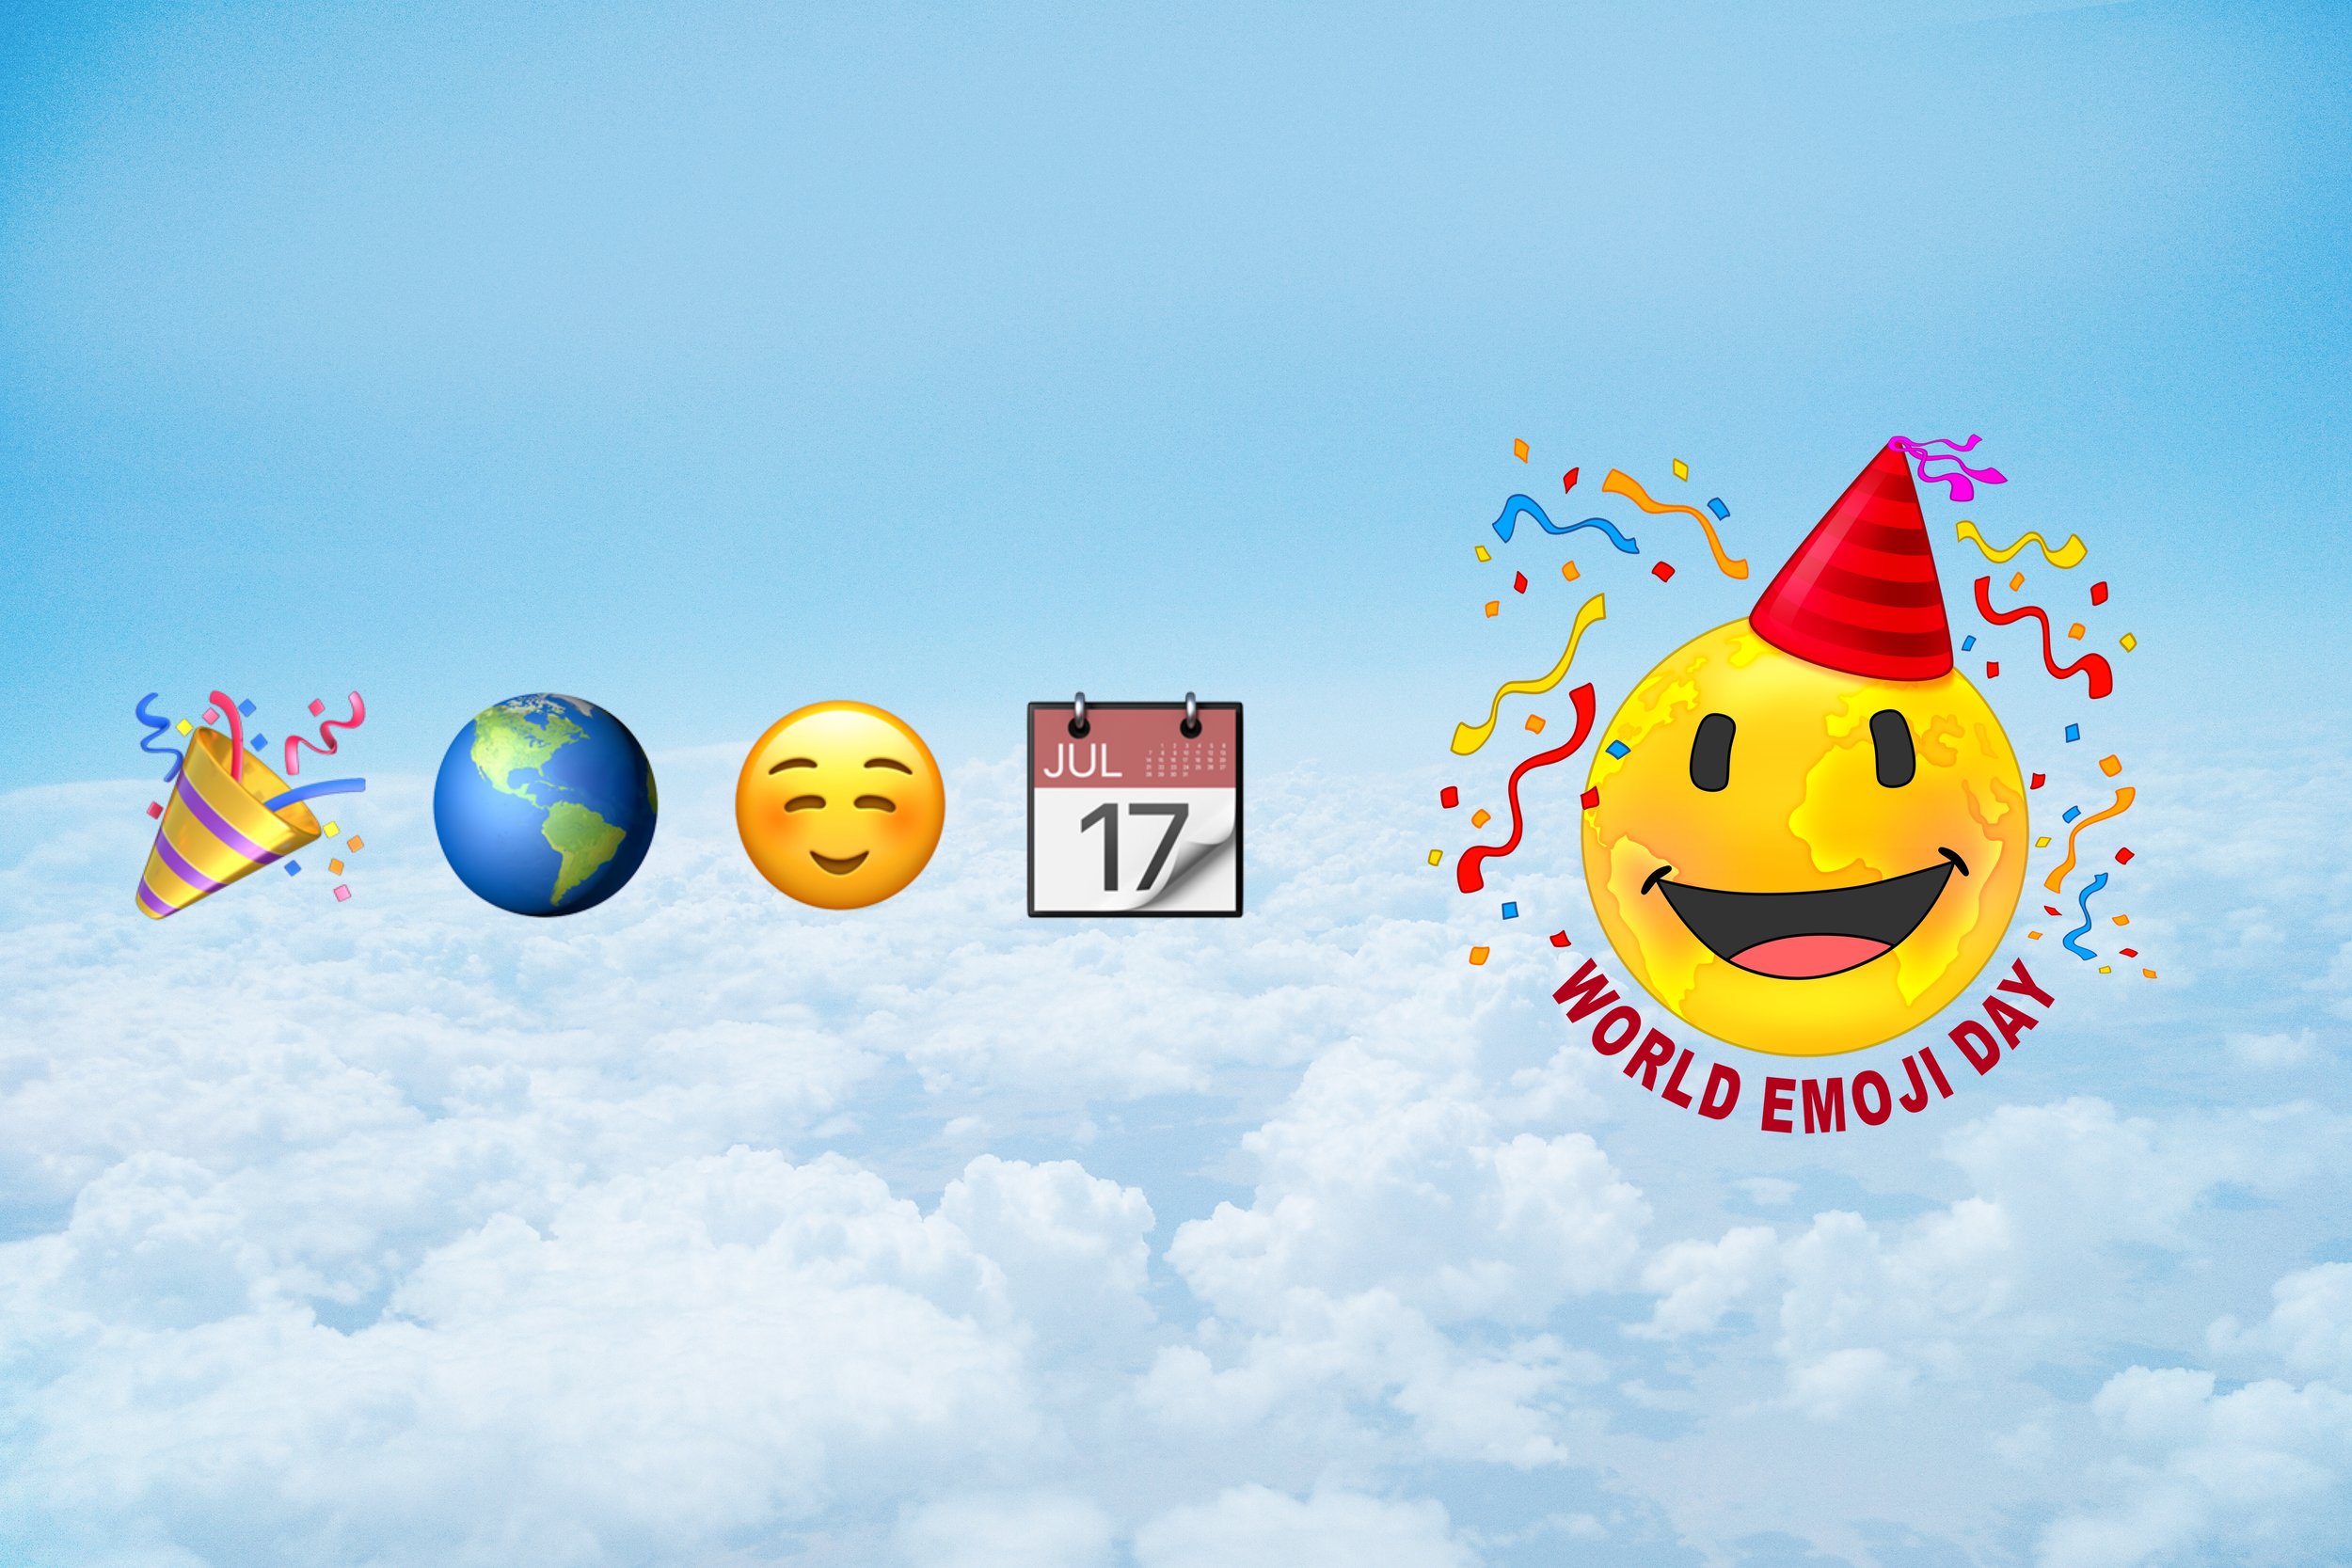 World Emoji Day! Express Yourself In Ways Words Can't Match